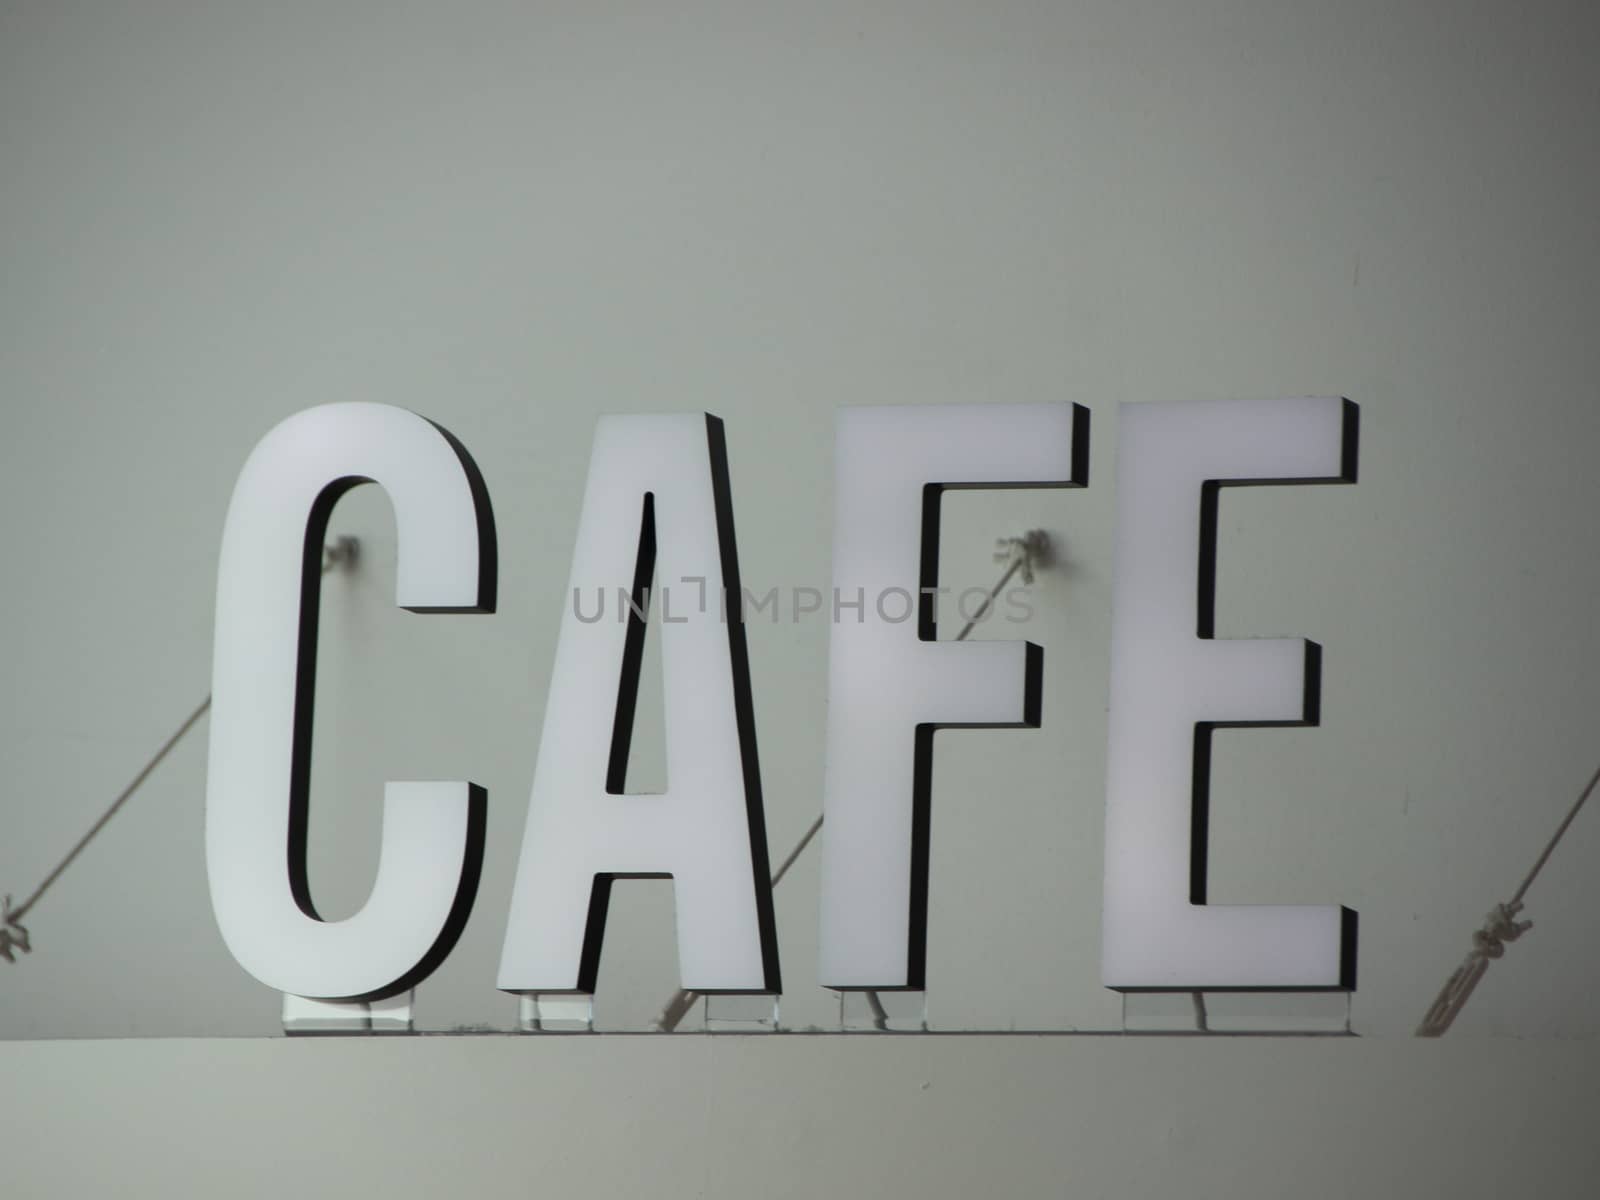 Top mounted White Cafe Sign with Wires by HoleInTheBox